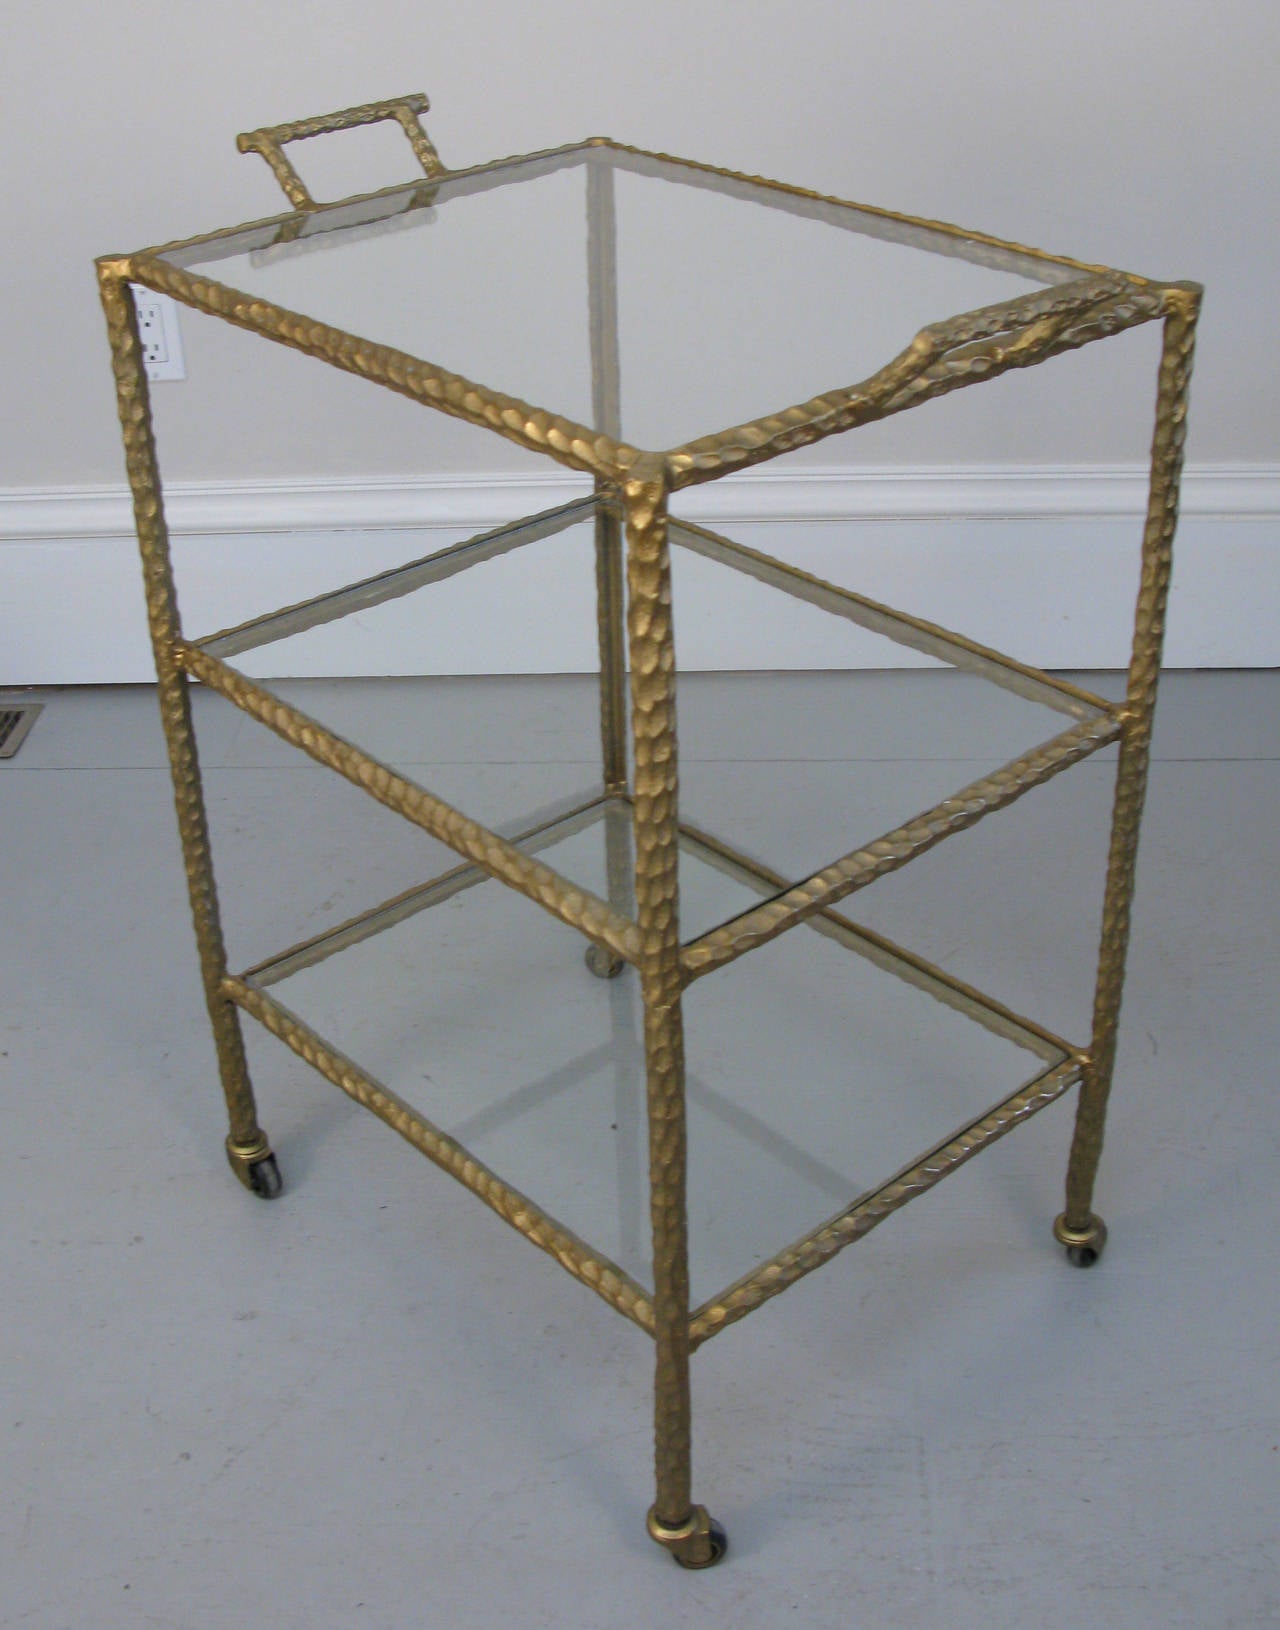 Bold yet delicate looking Mid-Century bar or serving cart made of iron and gold cold painted finish.